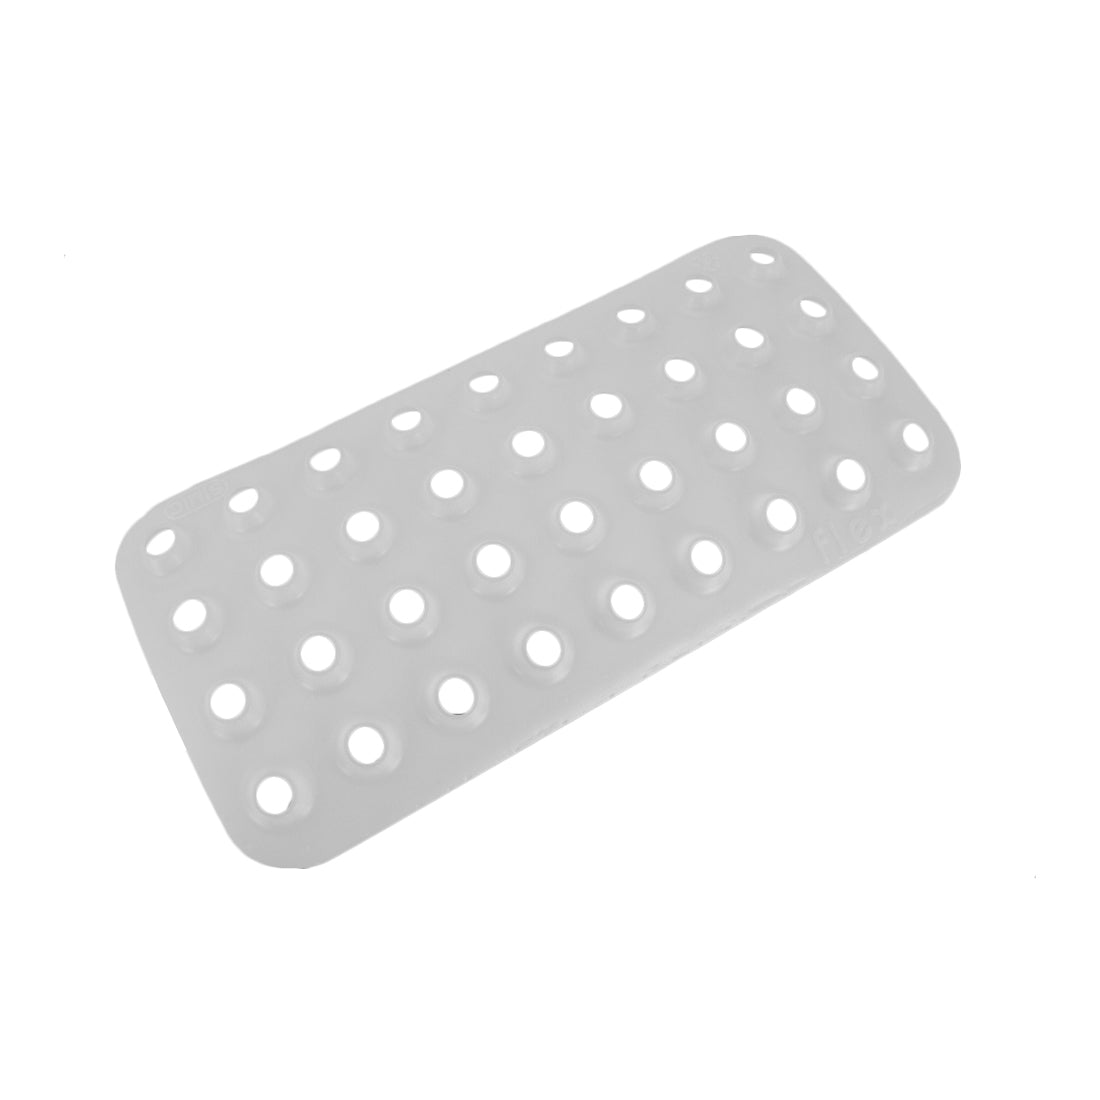 SMC Flex Pad Edge Protector Kit - Pad Tilted Right View